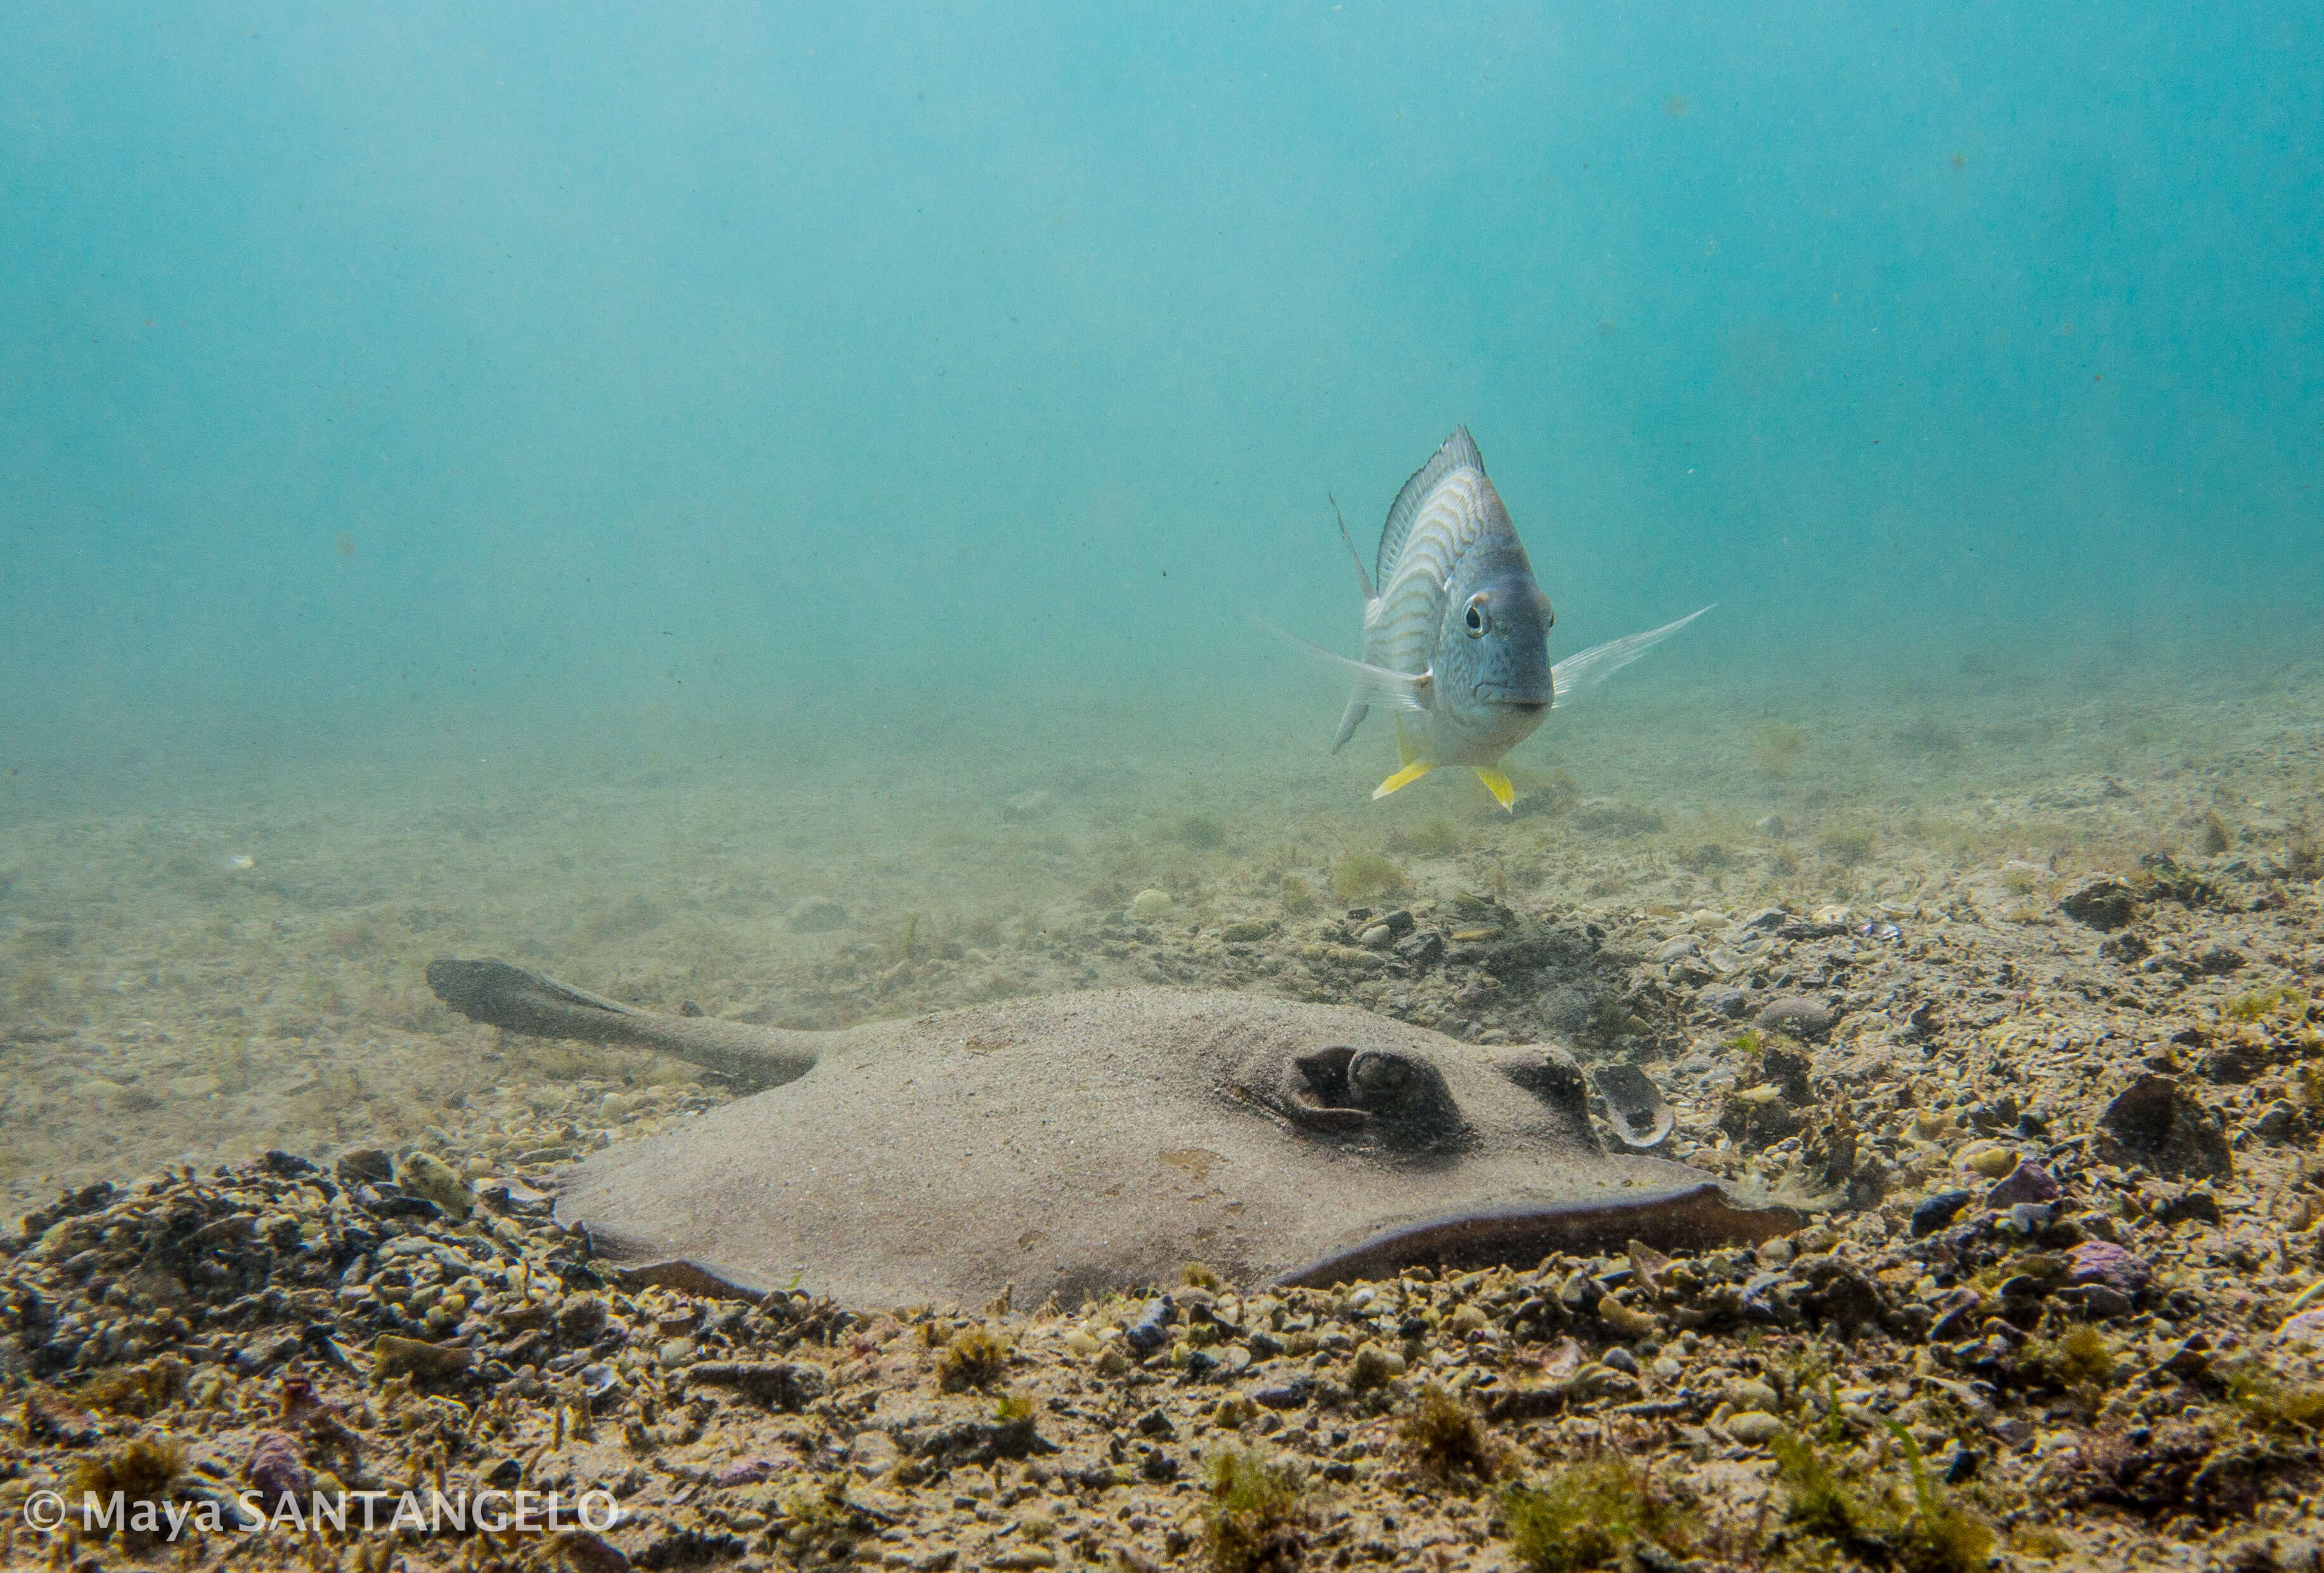 Common Stingaree (Trygonoptera testacea) and friend at Shelly Beach